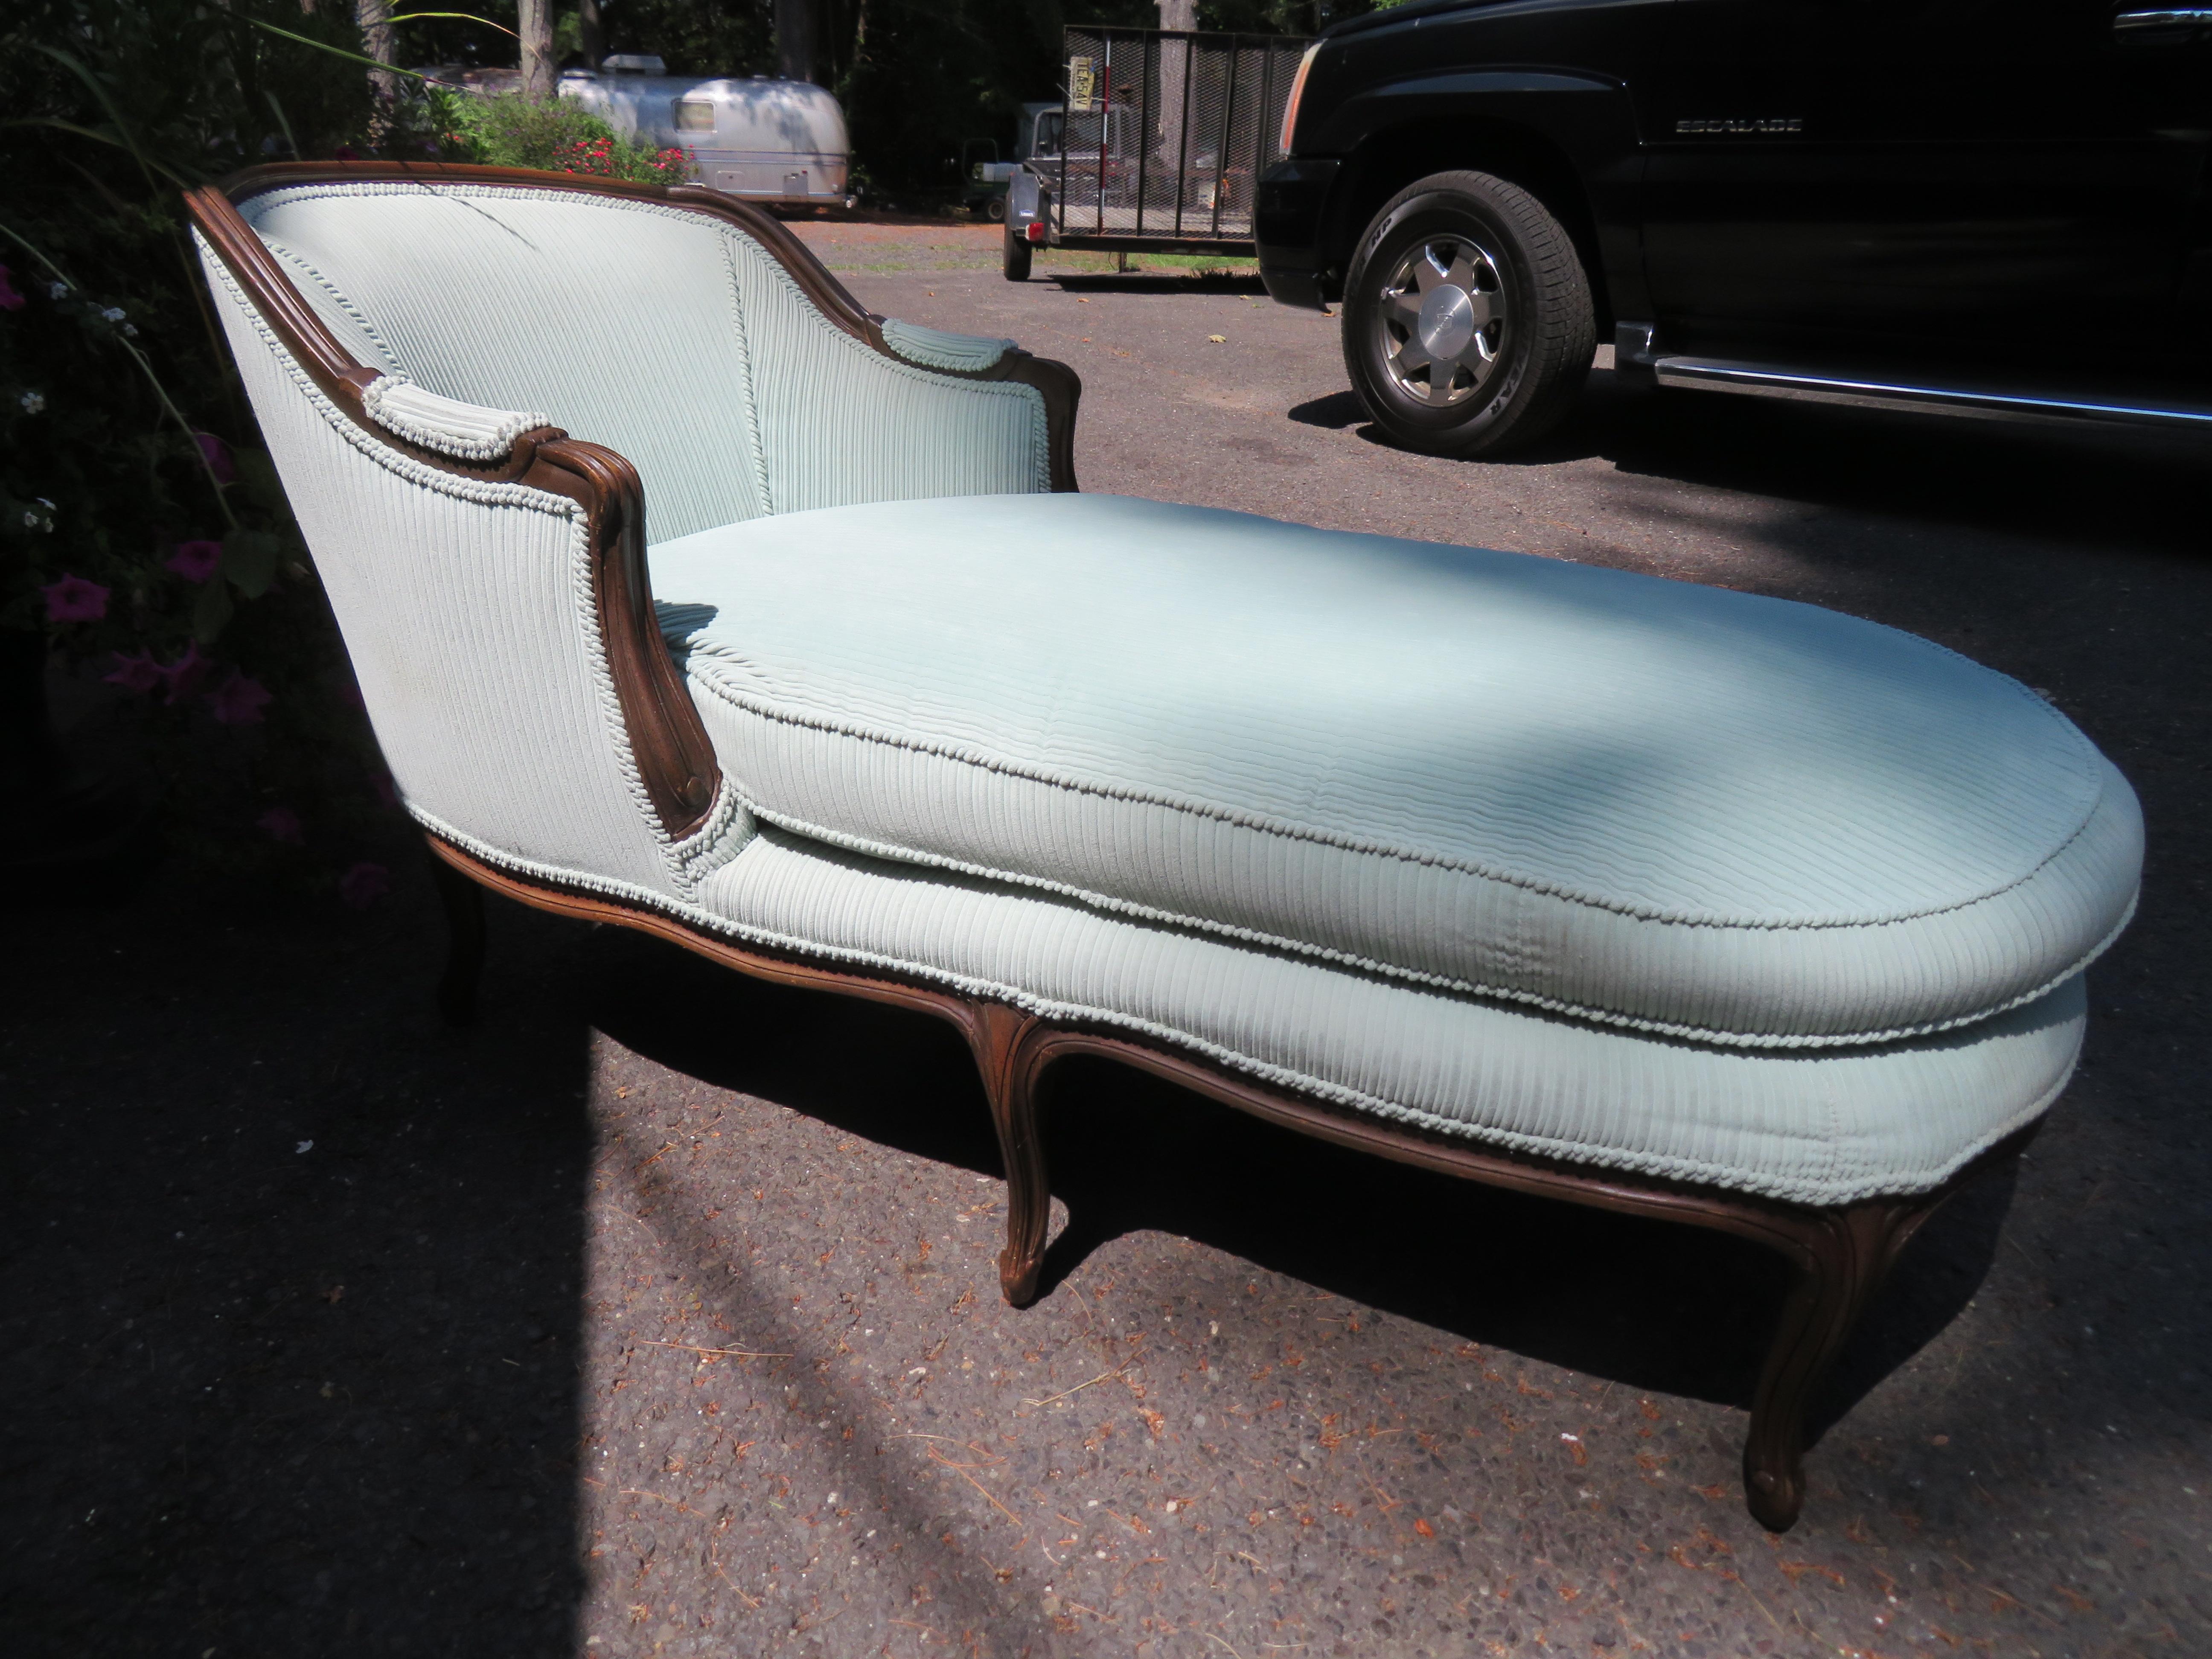 Lovely Louis XIV-style chaise lounge, circa 60's. This piece retains its original baby blue wide wale corduroy fabric in presentable condition-some light spots on one side of the double-sided cushion. The chaise lounge measures 31.5